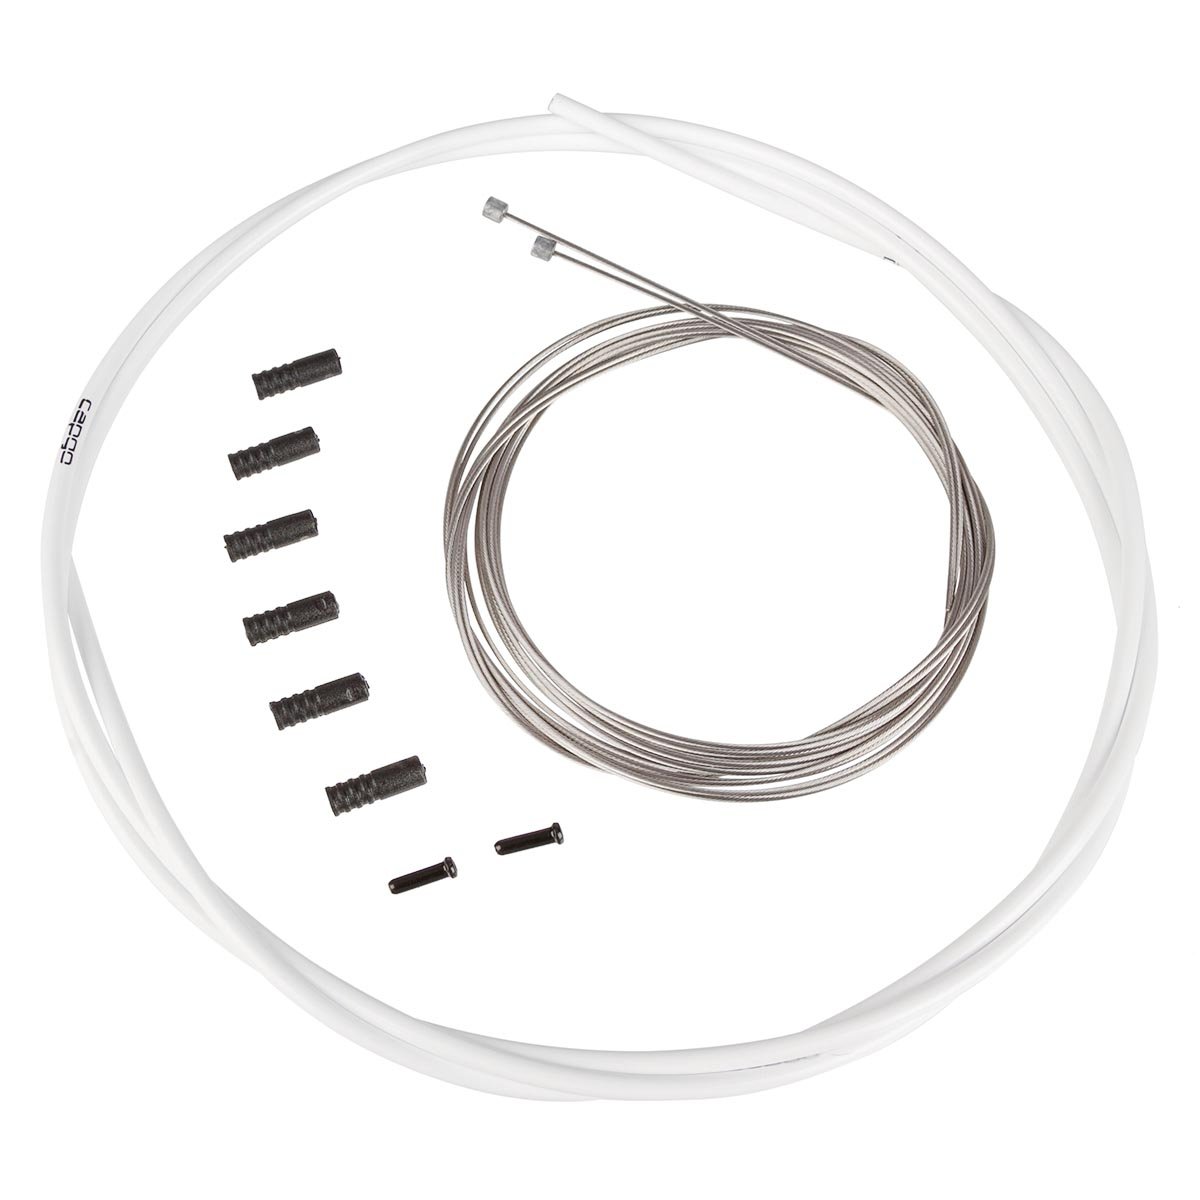 Capgo Cable Systems Shift Cable Set Eco Line for Shimano/SRAM Road and ATB/MTB, White, normal